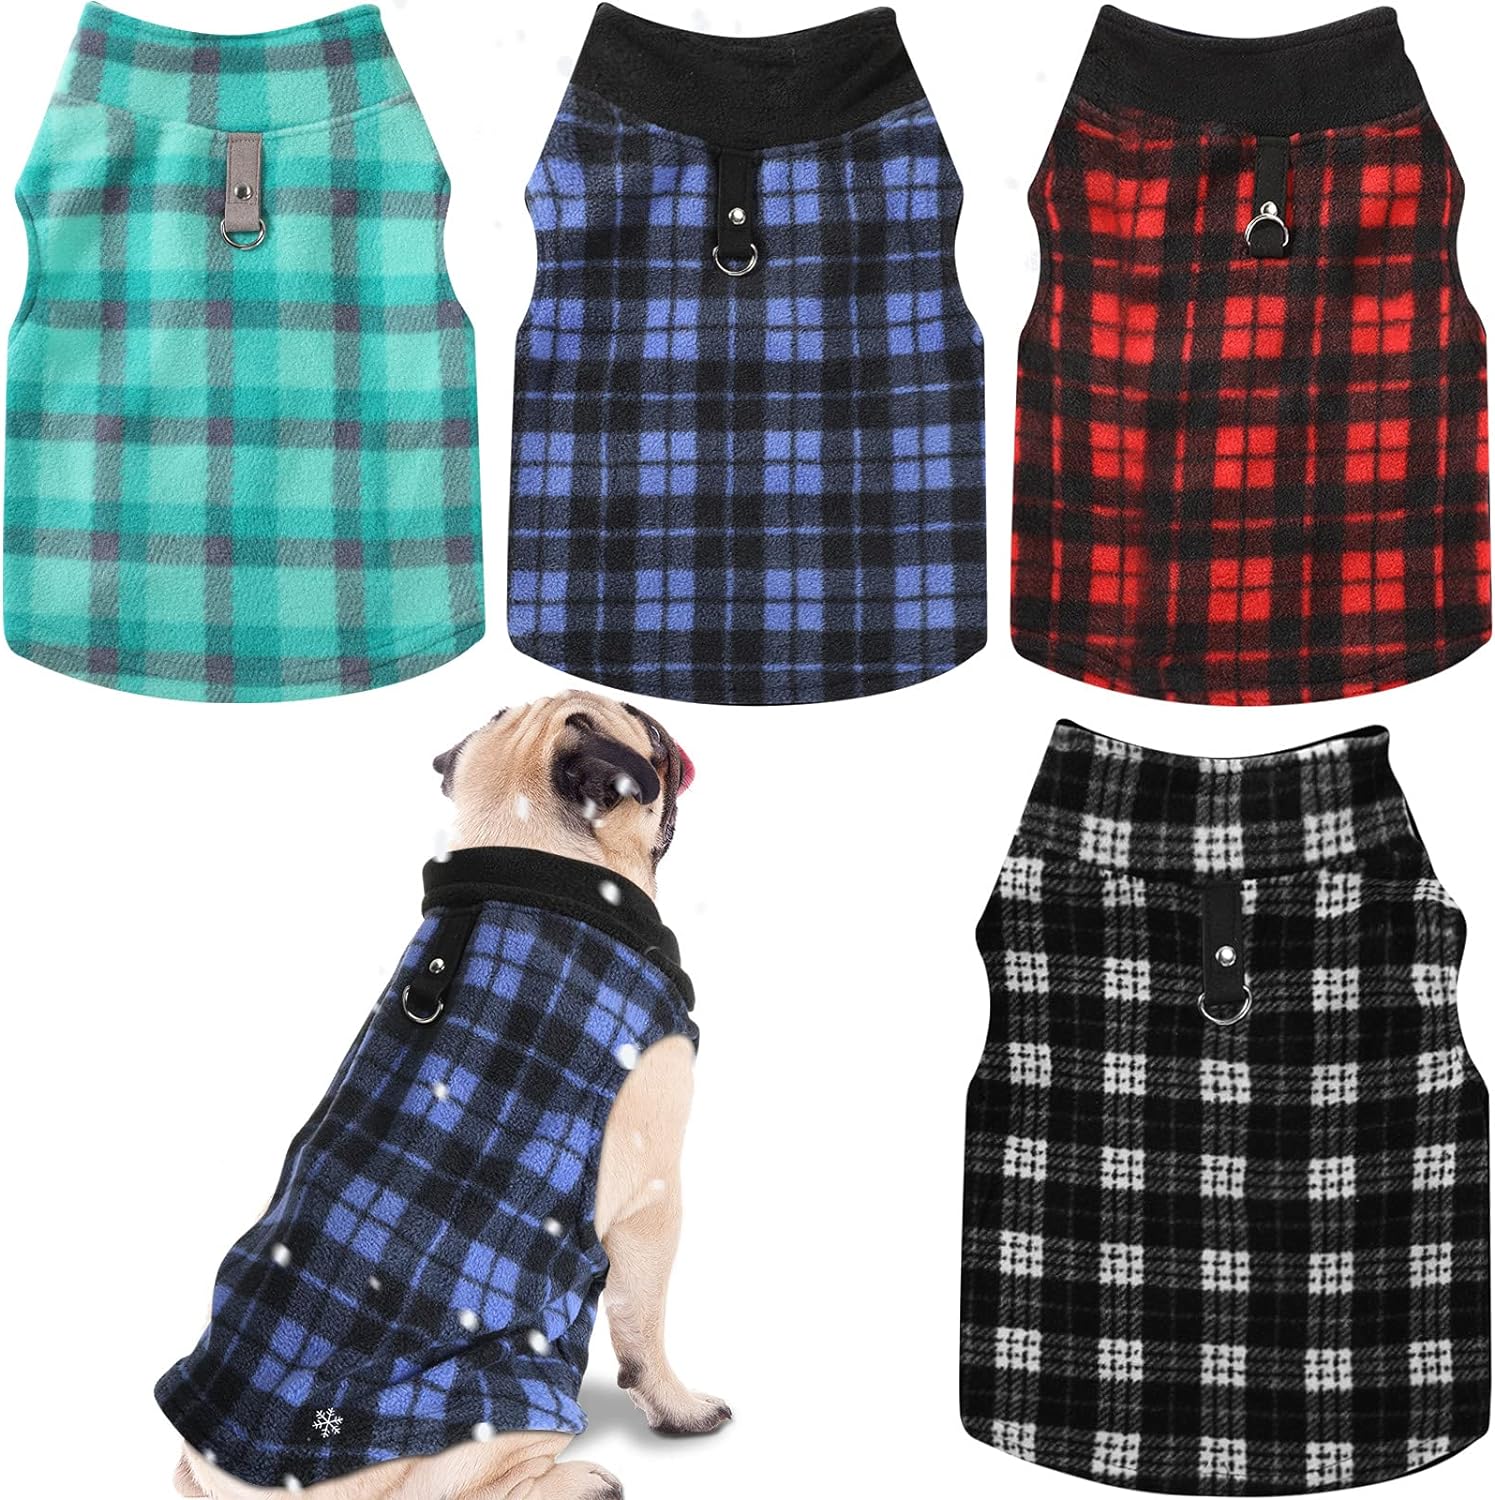 4 Pieces Winter Fabric Dog Sweater with Leash Ring Fleece Vest Dog Pullover Jacket Warm Pet Dog Clothes for Puppy Small Dogs Cat Chihuahua Boy (Plaid Pattern, L)